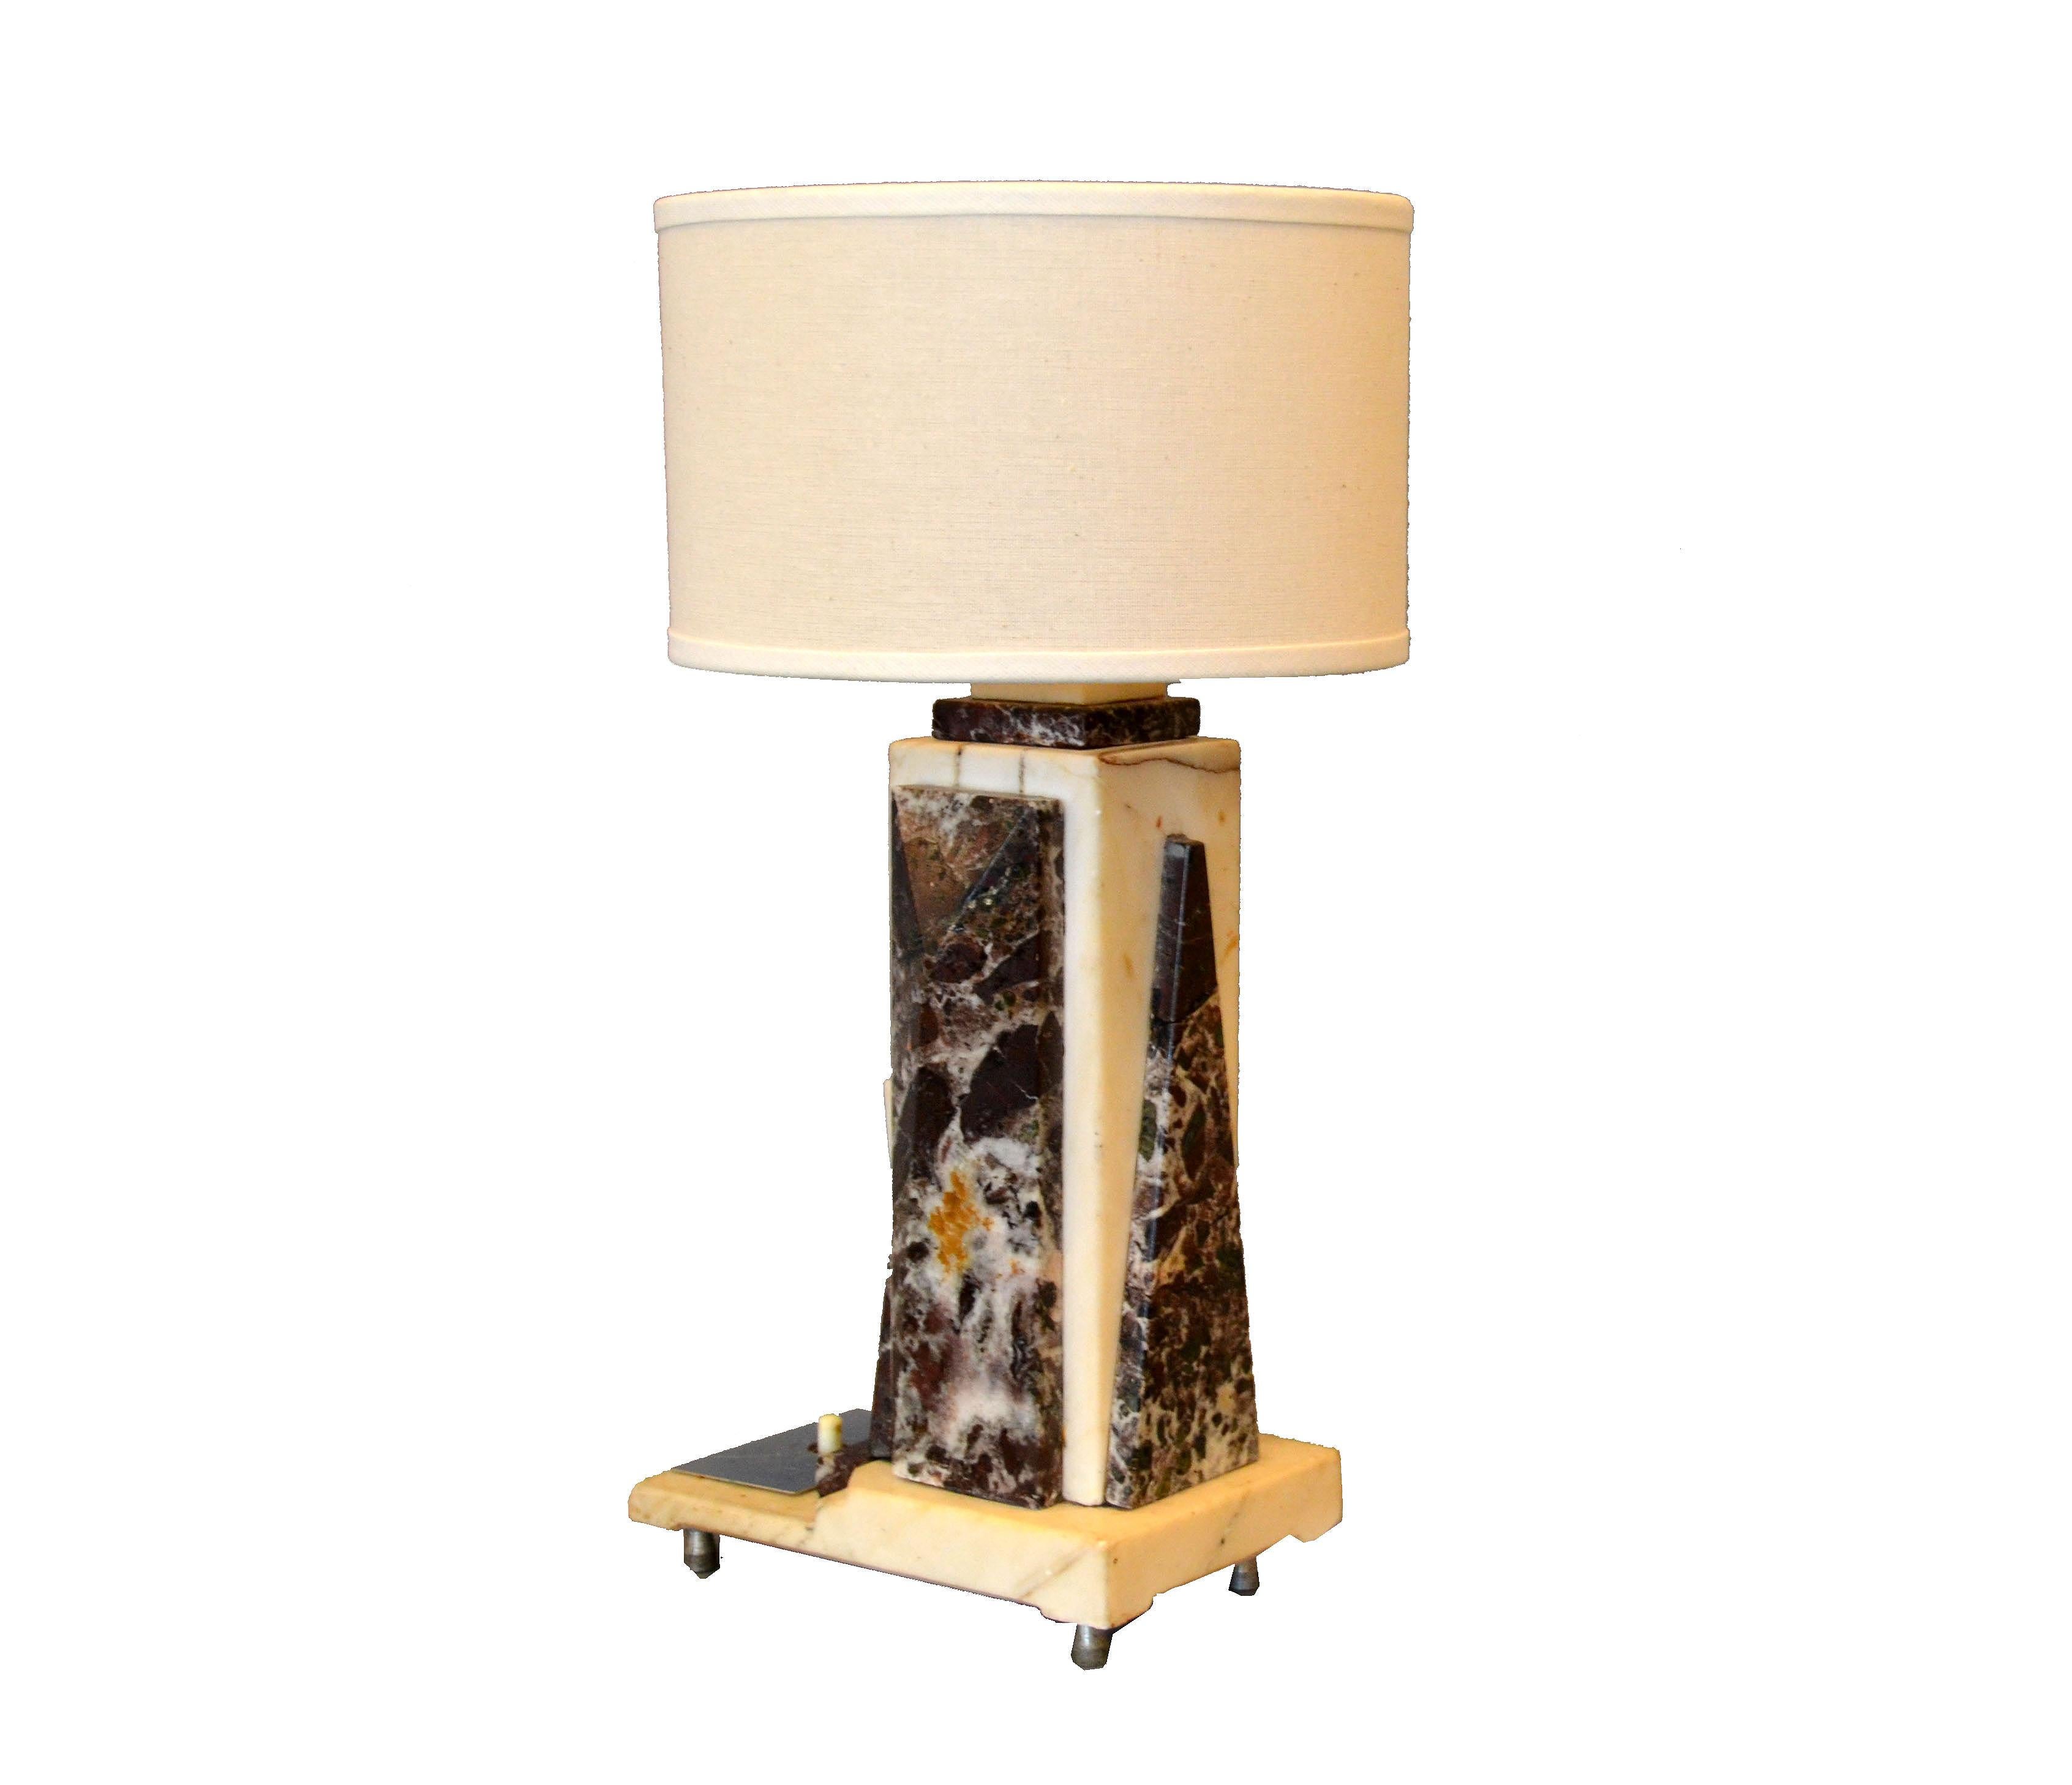 Petite Art Deco Italian Marble and Chrome Bedside Table Lamp with Round Shade 2